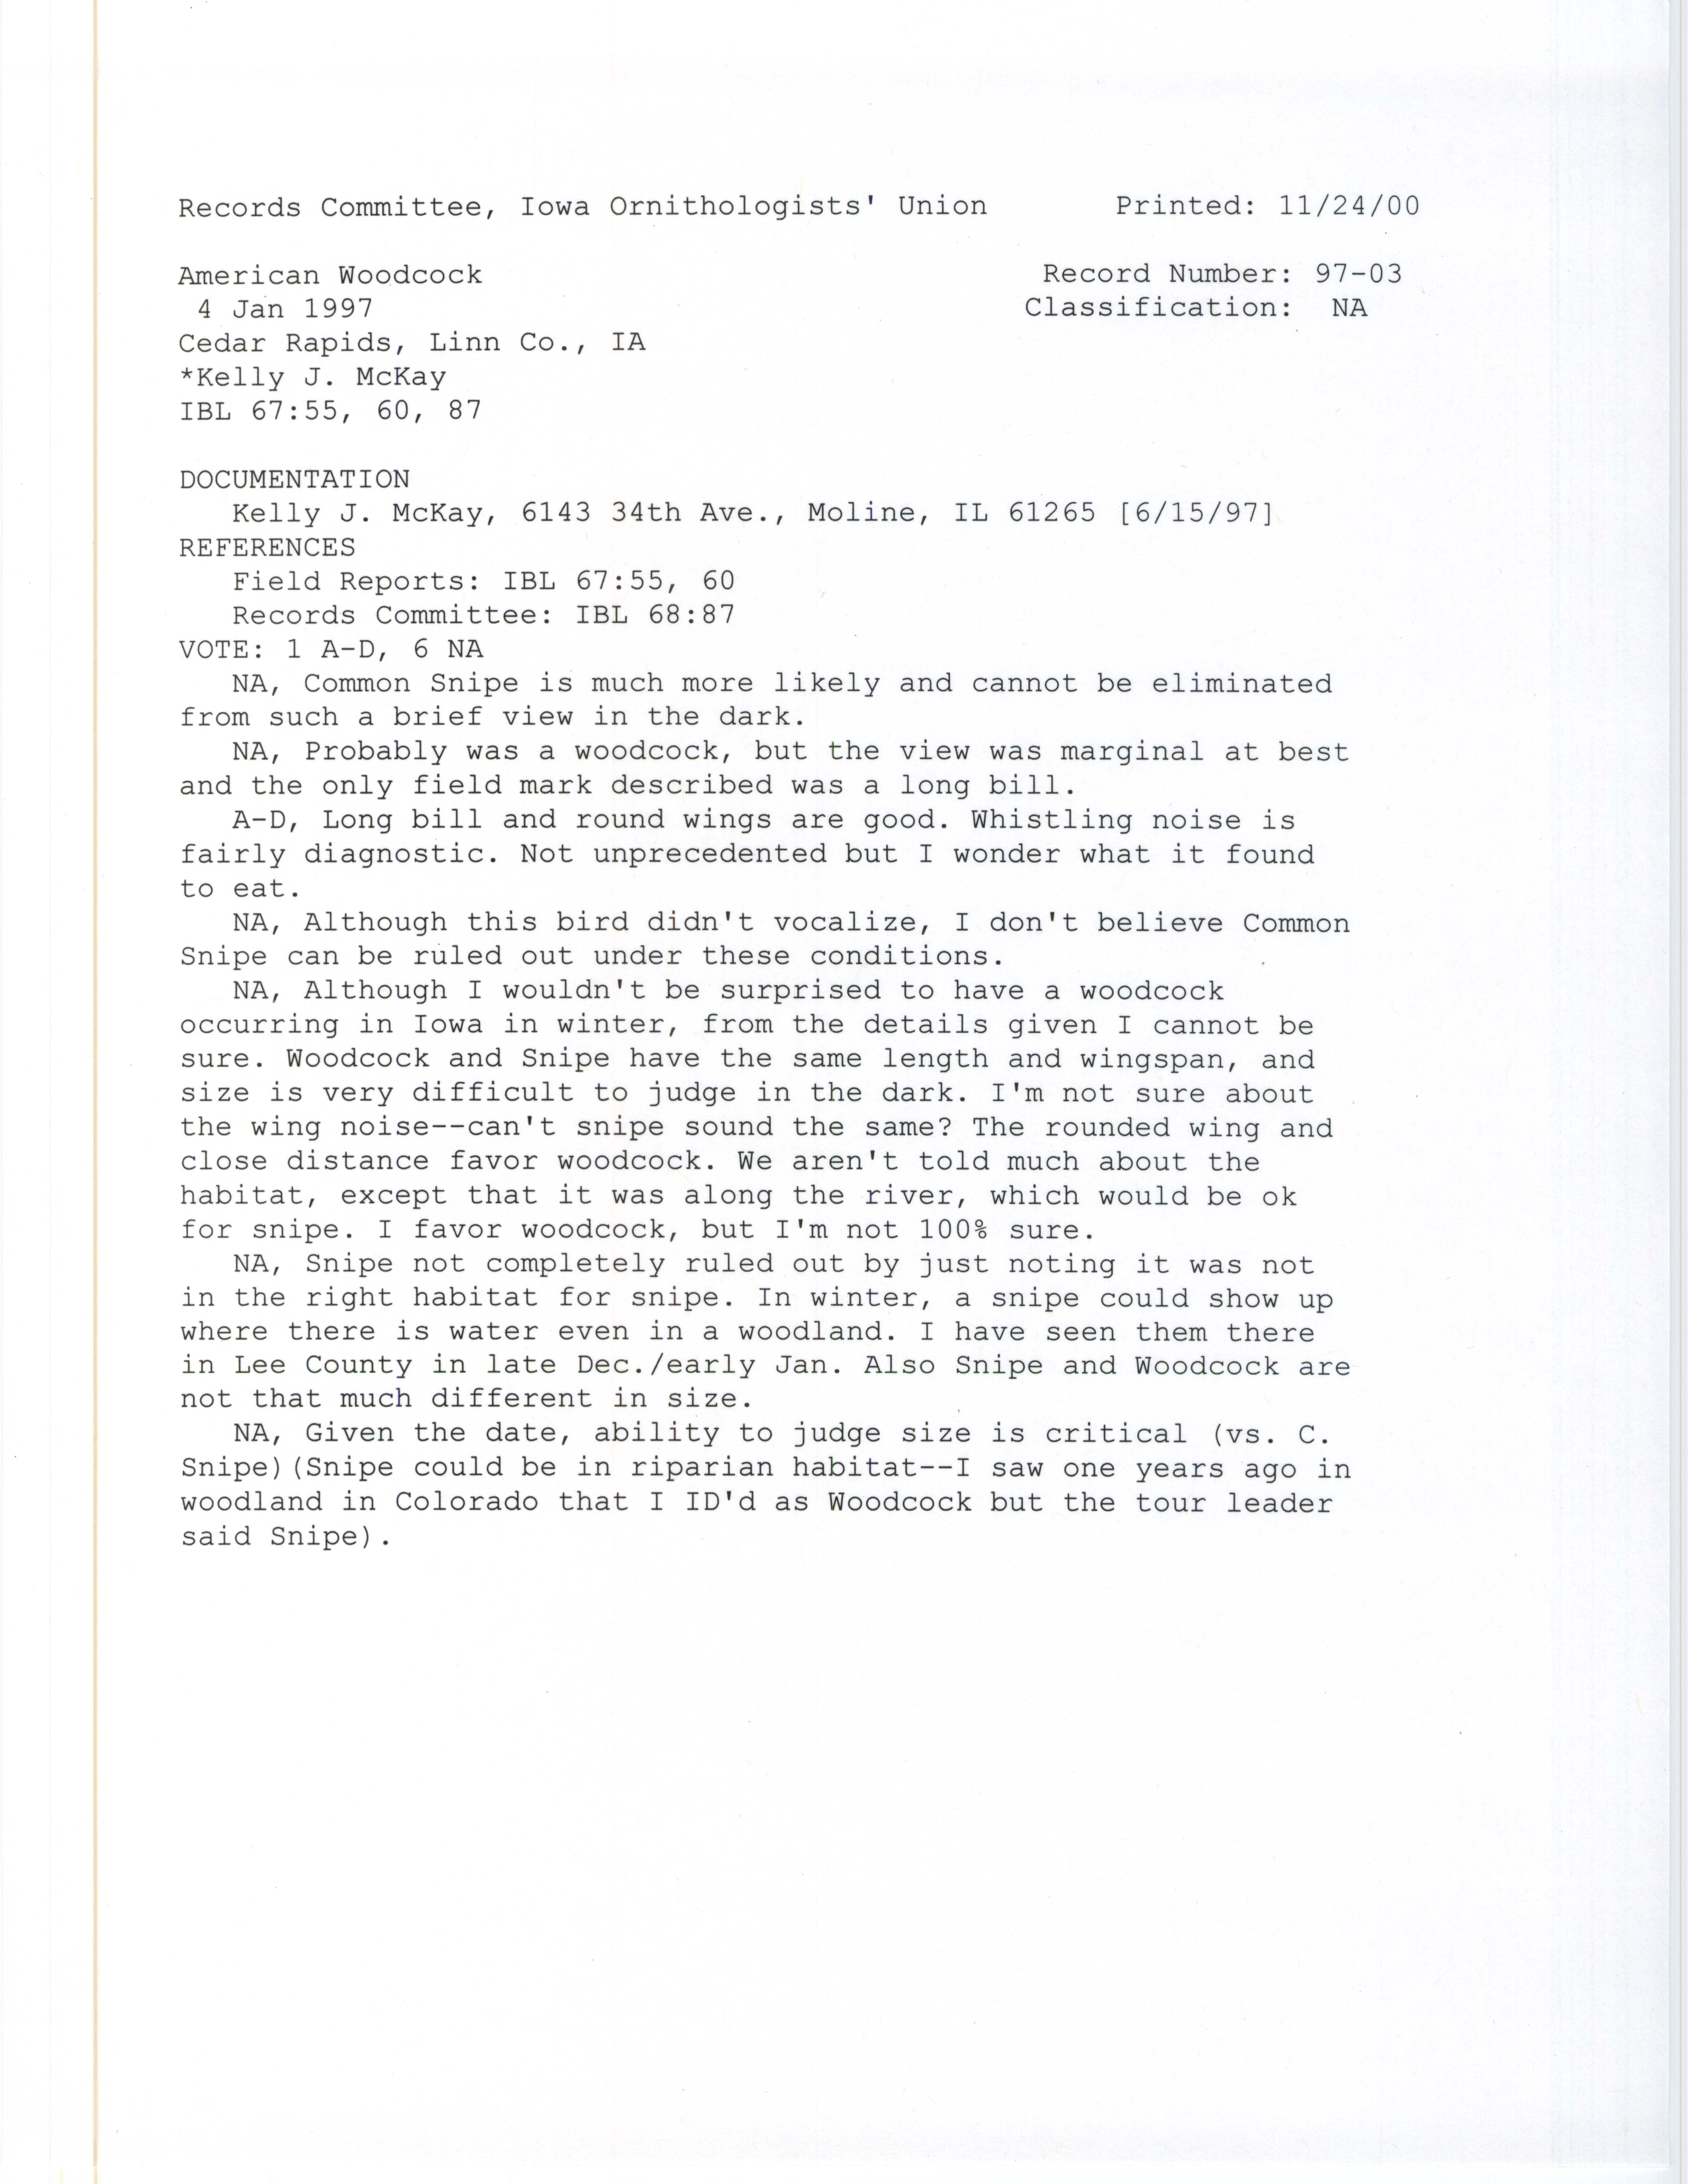 Records Committee review for rare bird sighting of American Woodcock at Cedar Rapids, 1997